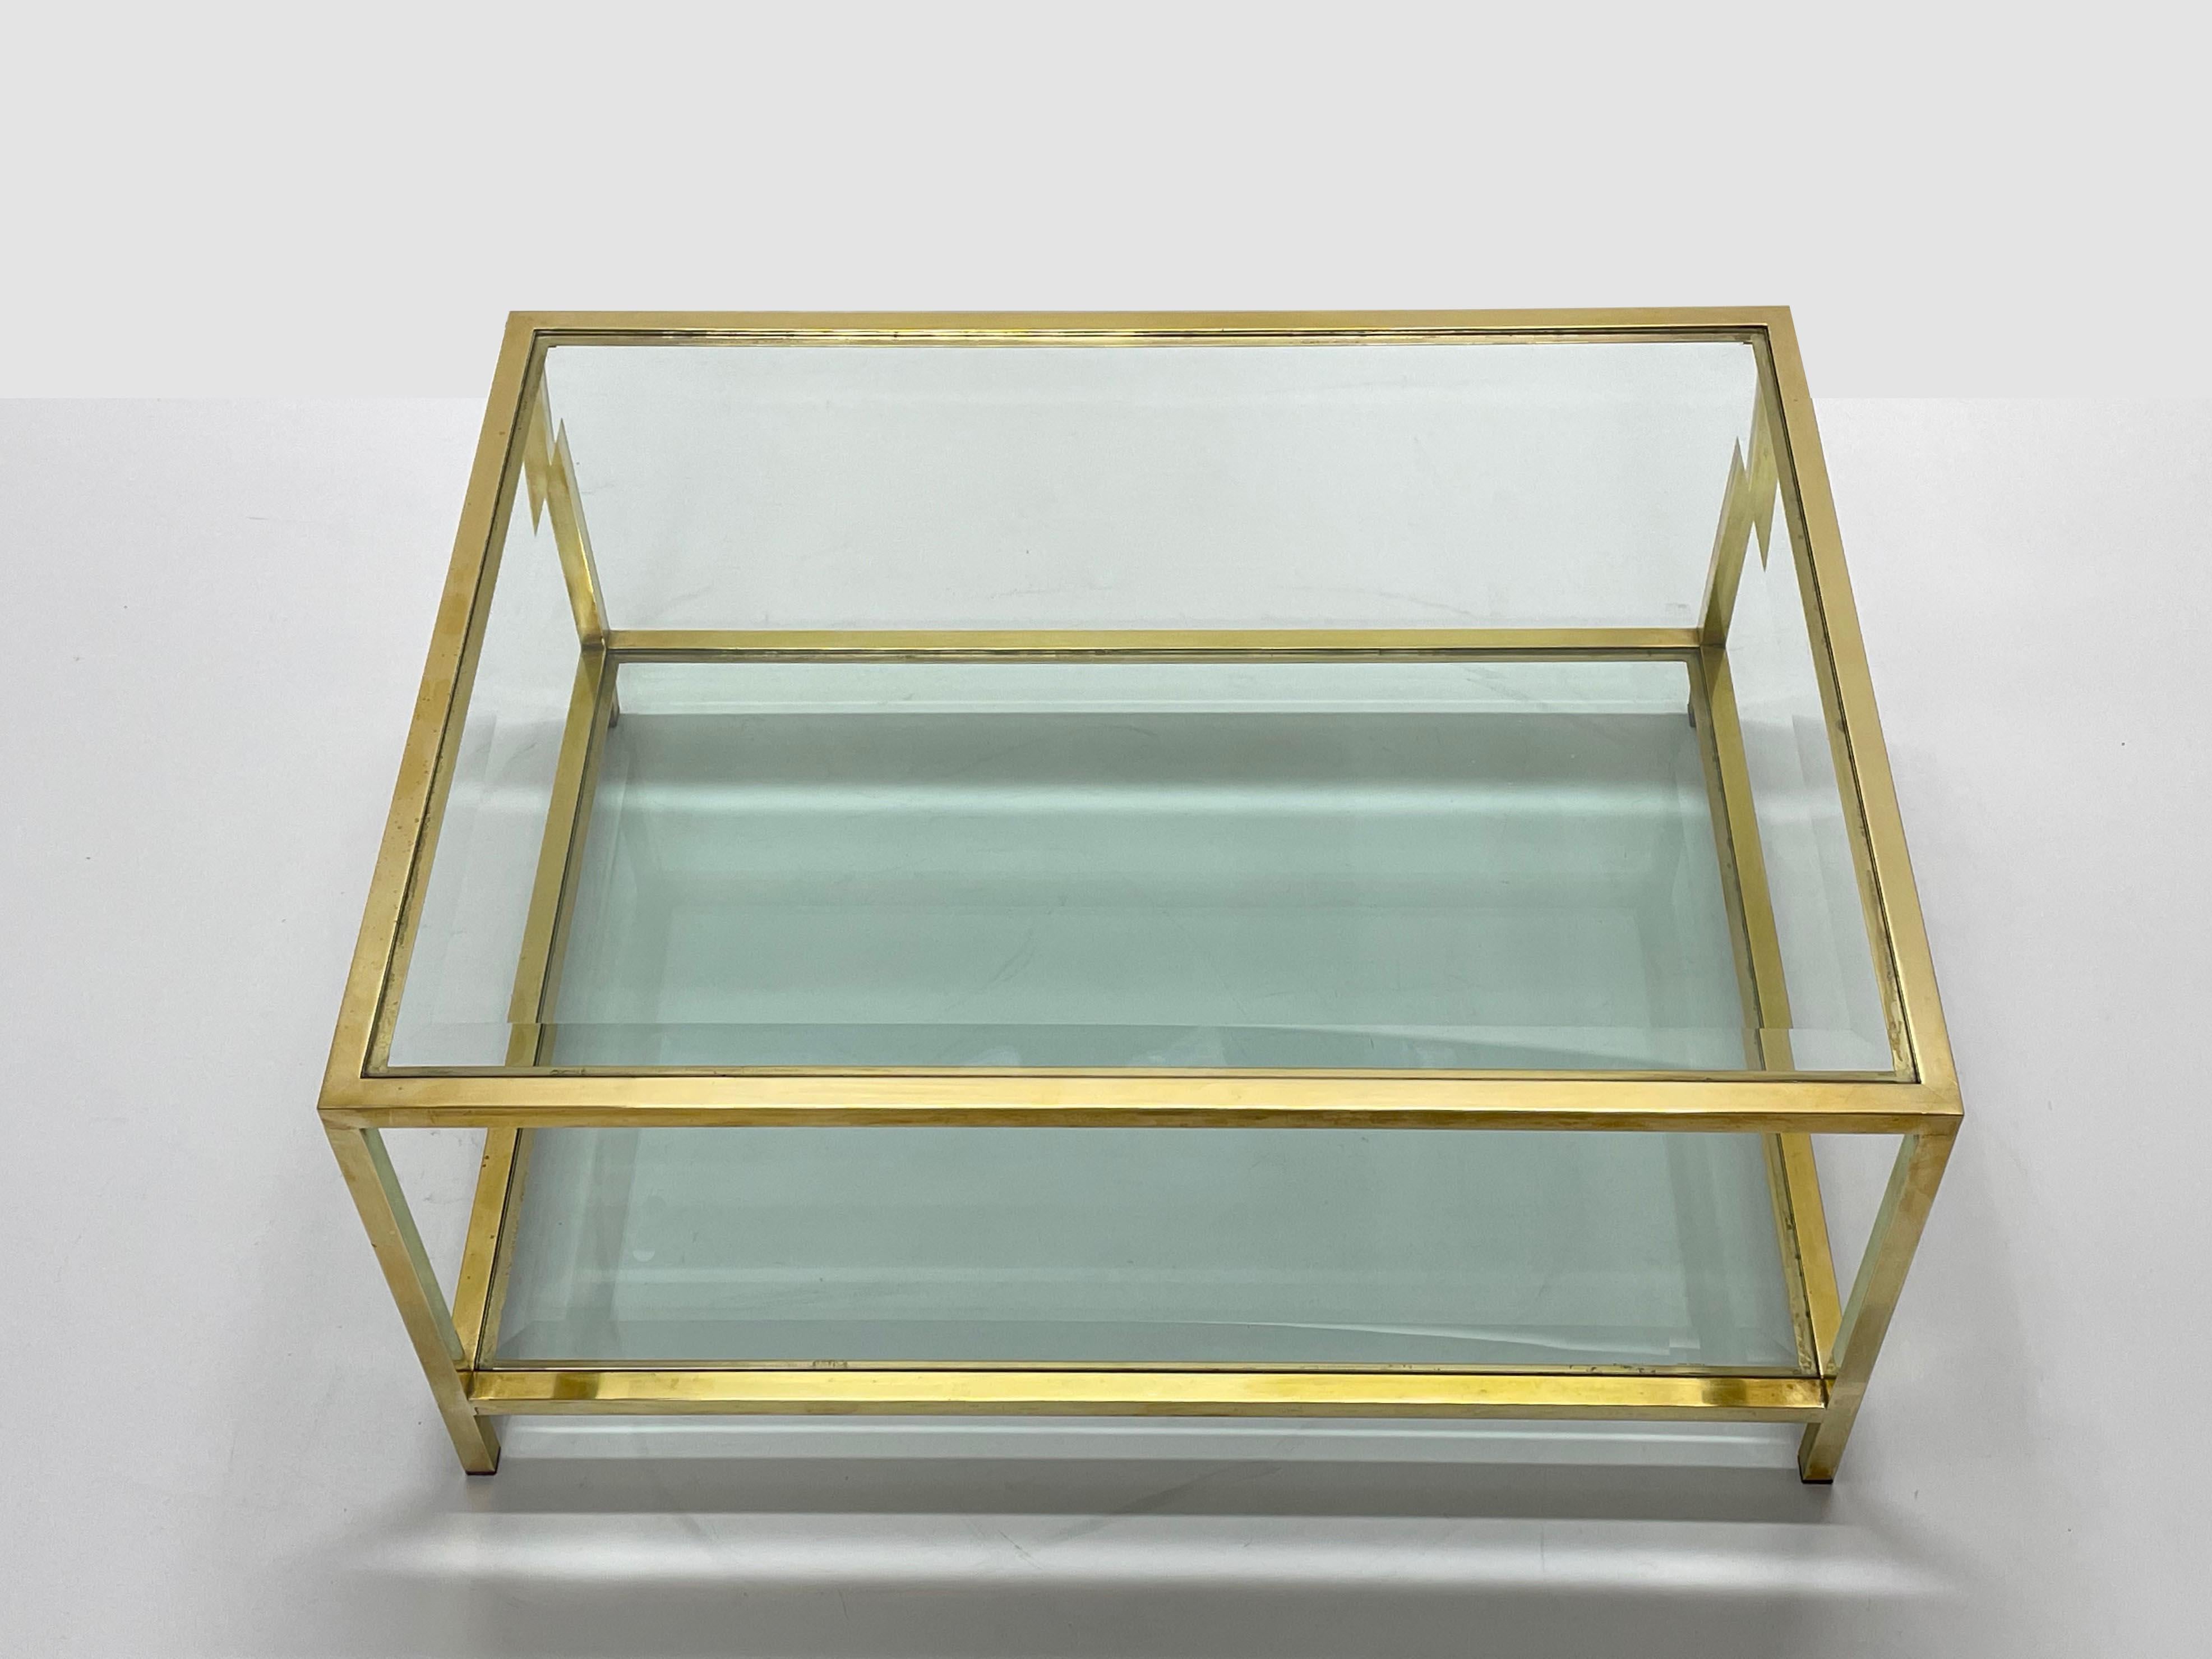 MidCentury Brass and Glass Italian Double-Tiered Rectangular Coffee Table, 1970s For Sale 13